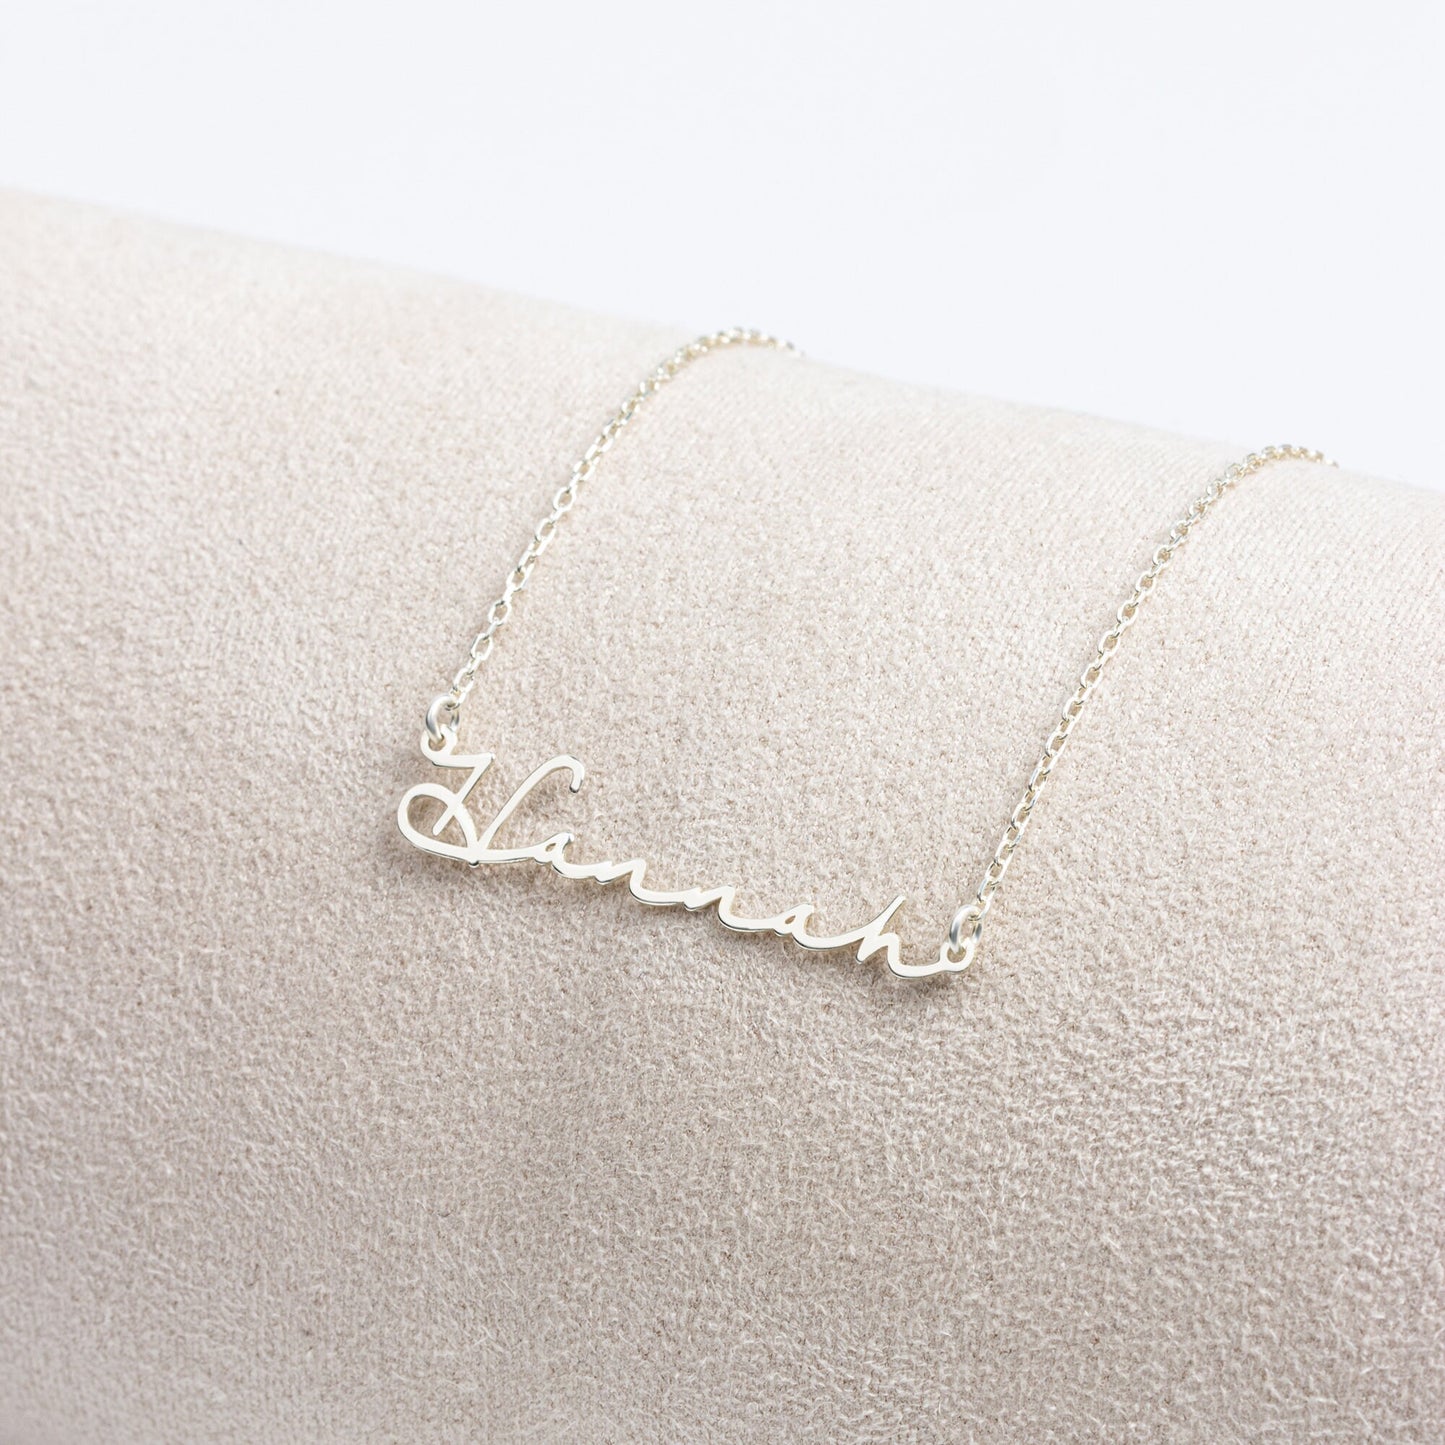 Gold Name Necklace | Sterling Silver Handwriting Name Necklace | Gold , Rose Gold , Silver | Best Friend Christmas Gift | Mom Birthday Gift